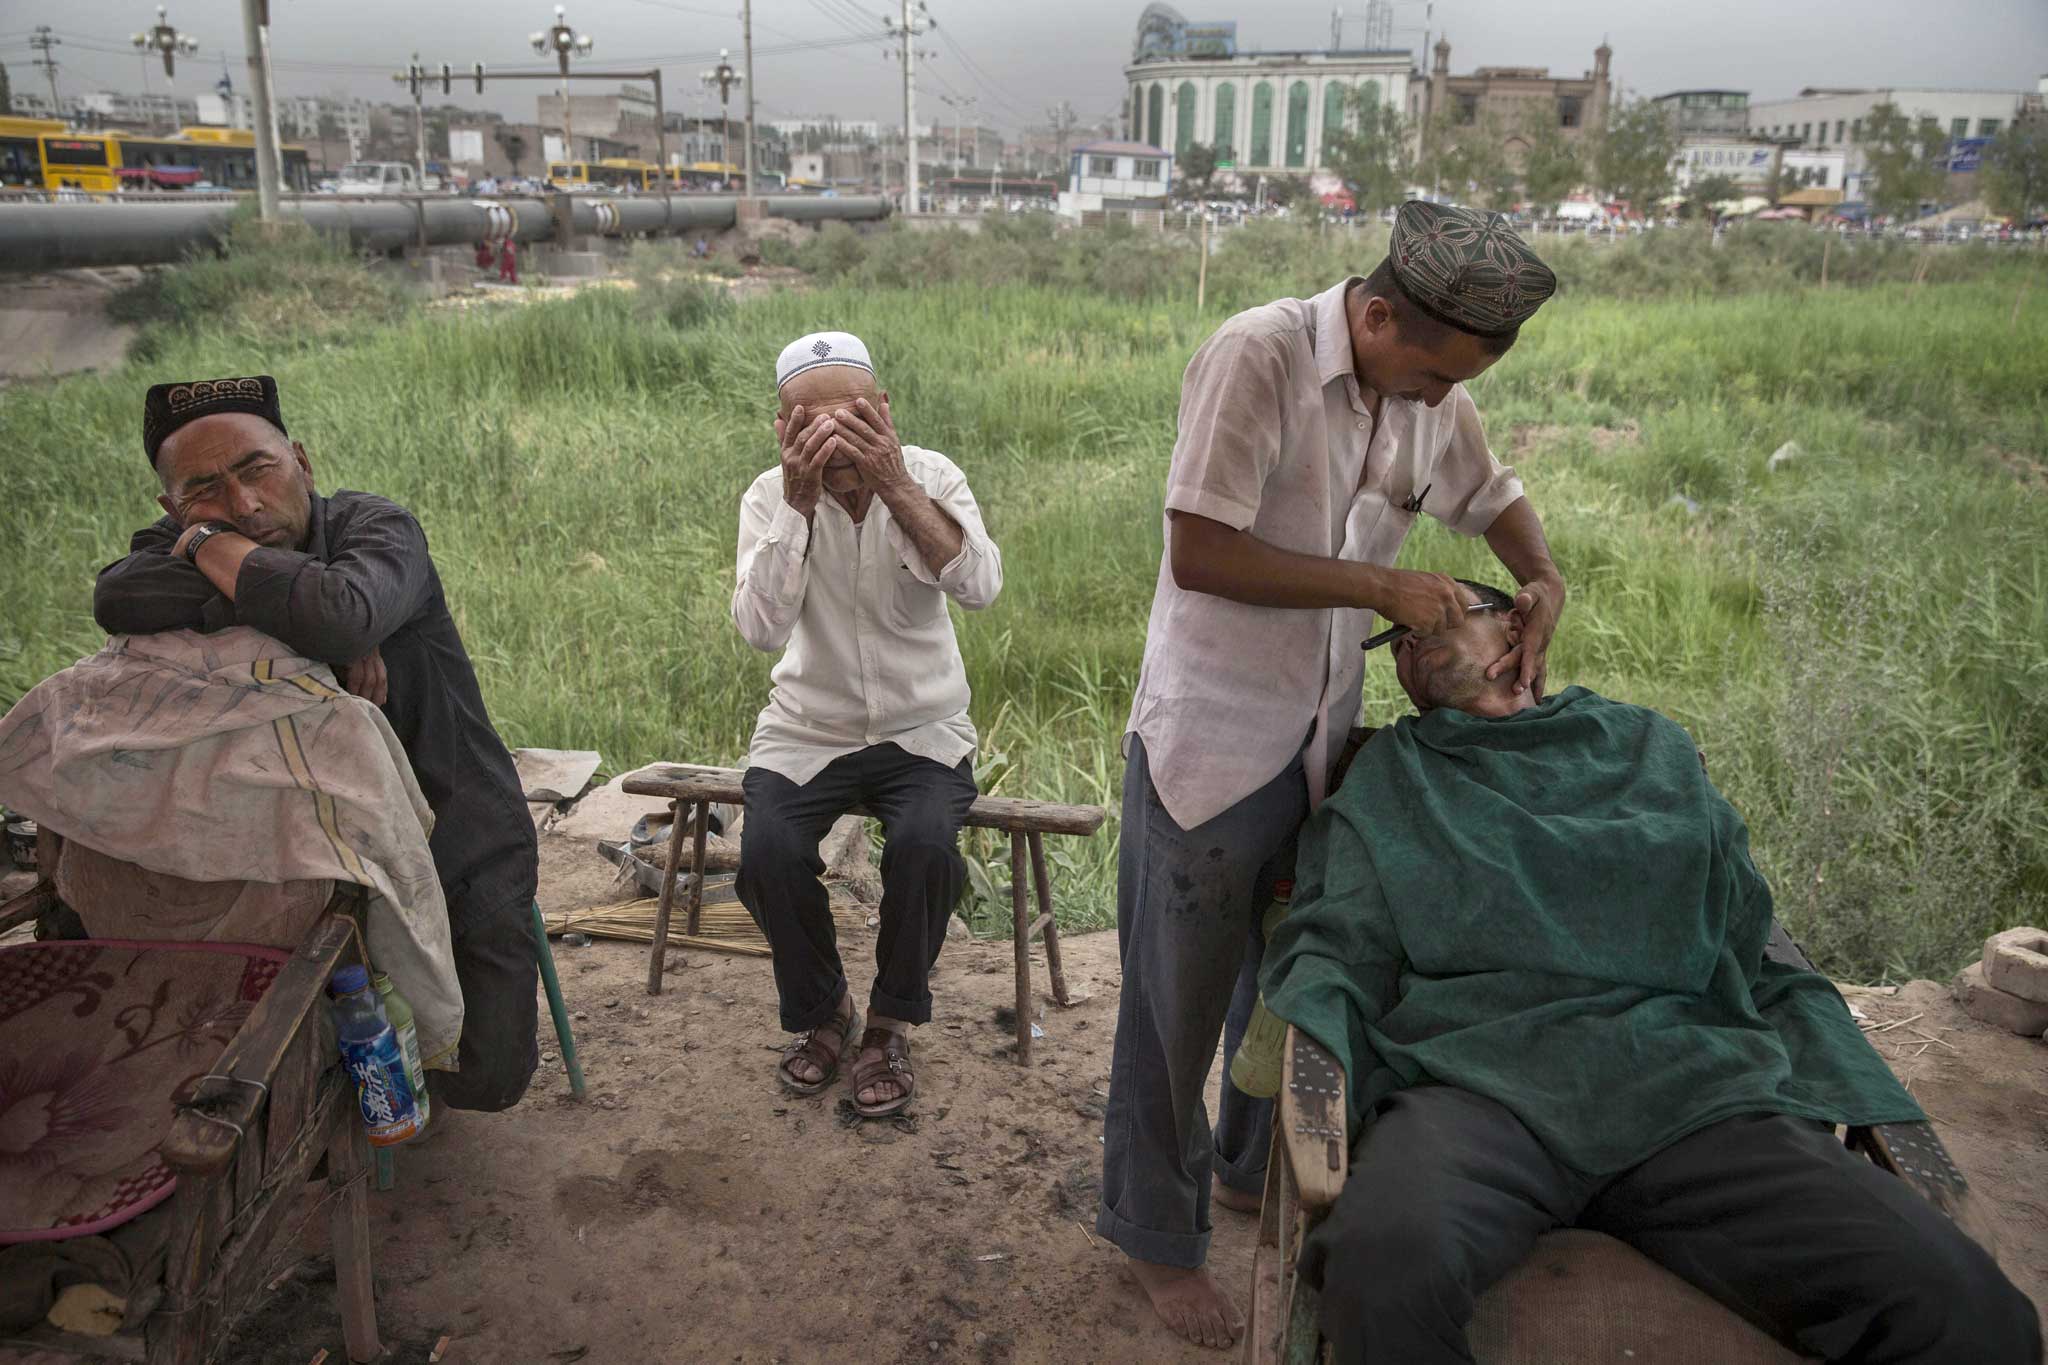 Scraping a living: an Uighur shaves customers at his open air stall in Xinjiang province, the site of recent ethnic unrest